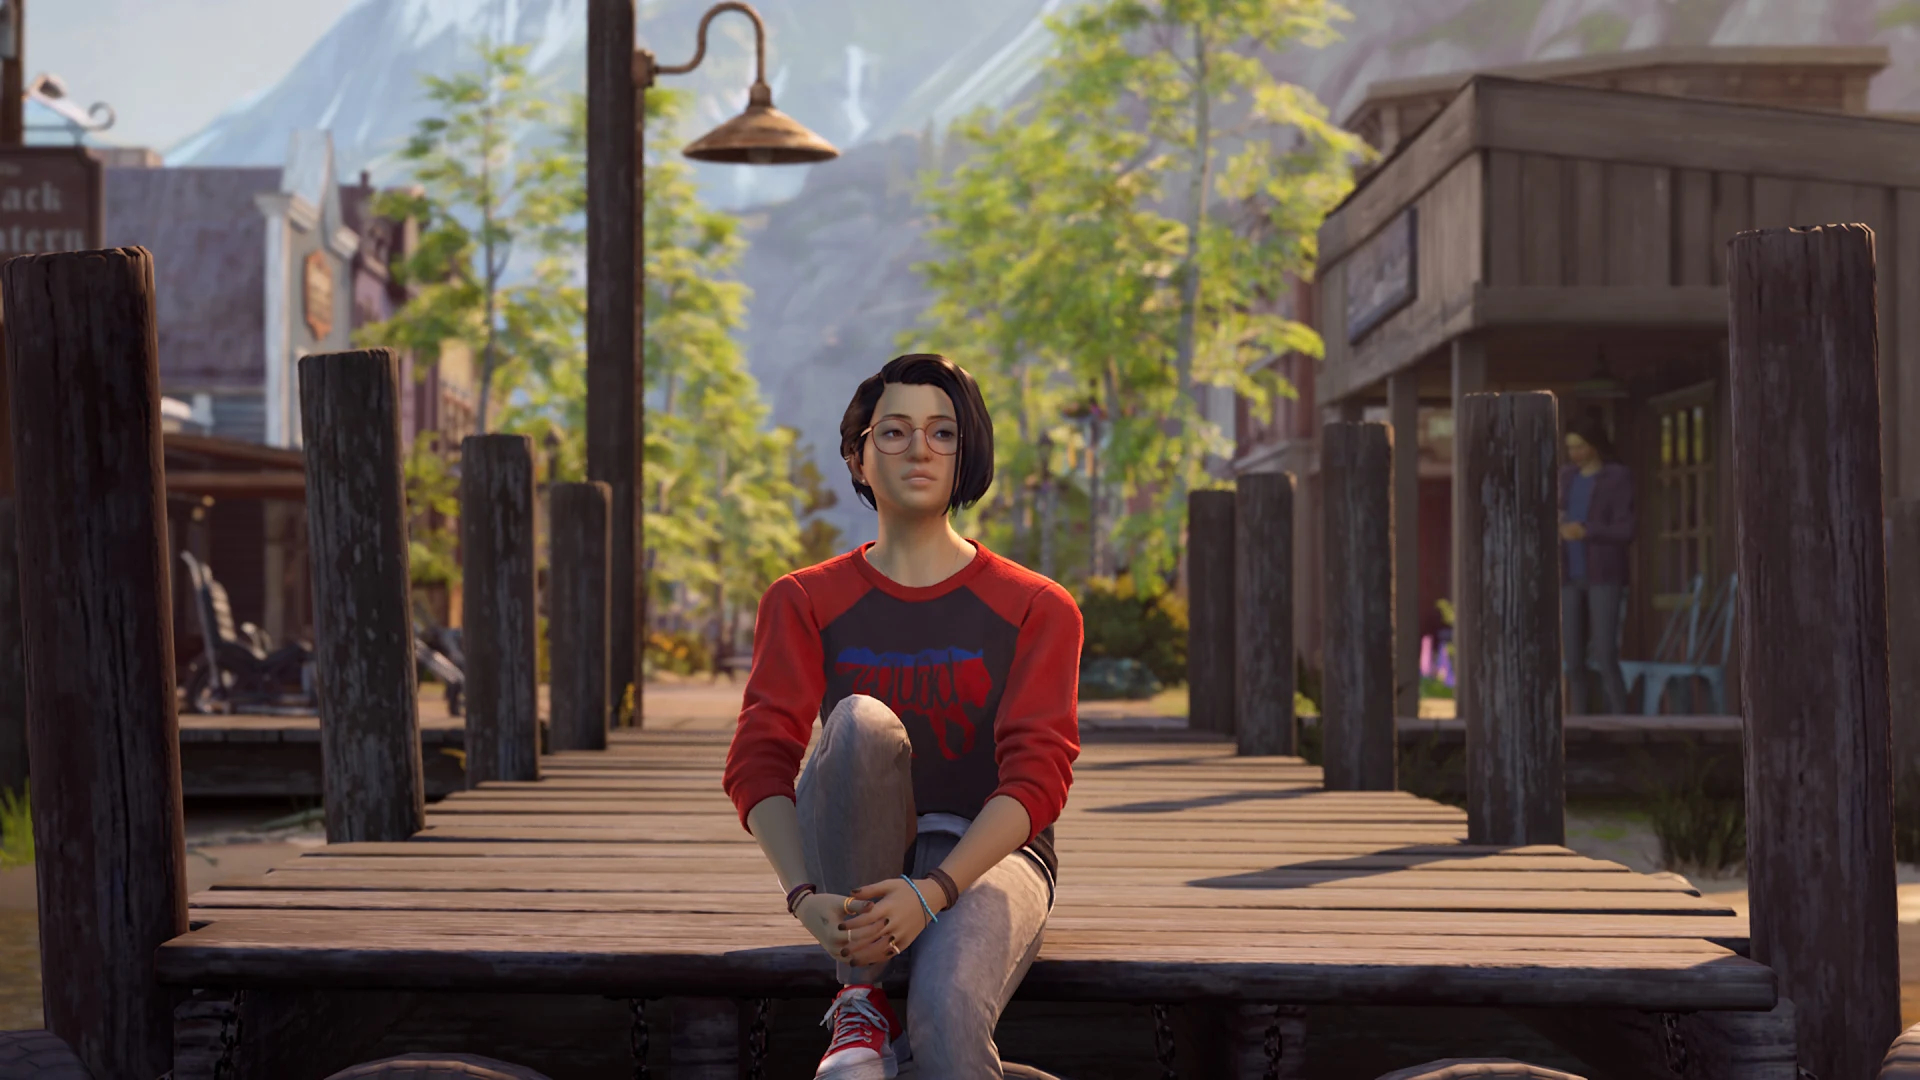 Life is Strange: True Colors Review - IGN